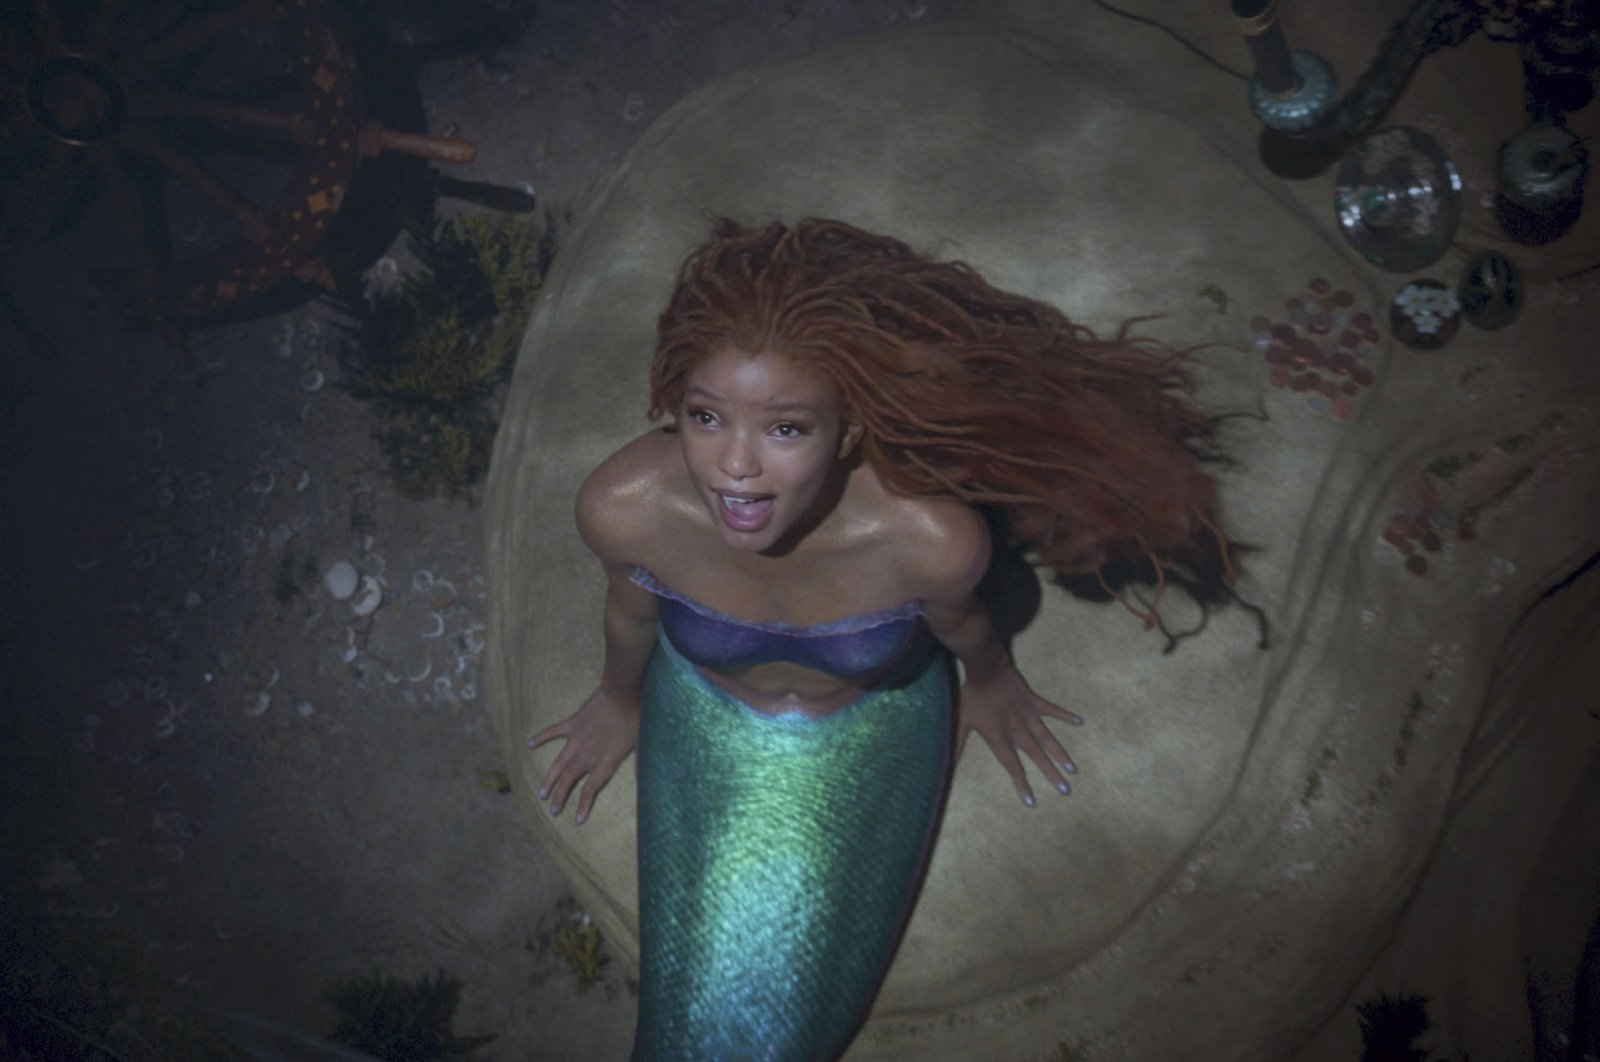 ‘The Little Mermaid’: Disney continues to butcher its classics